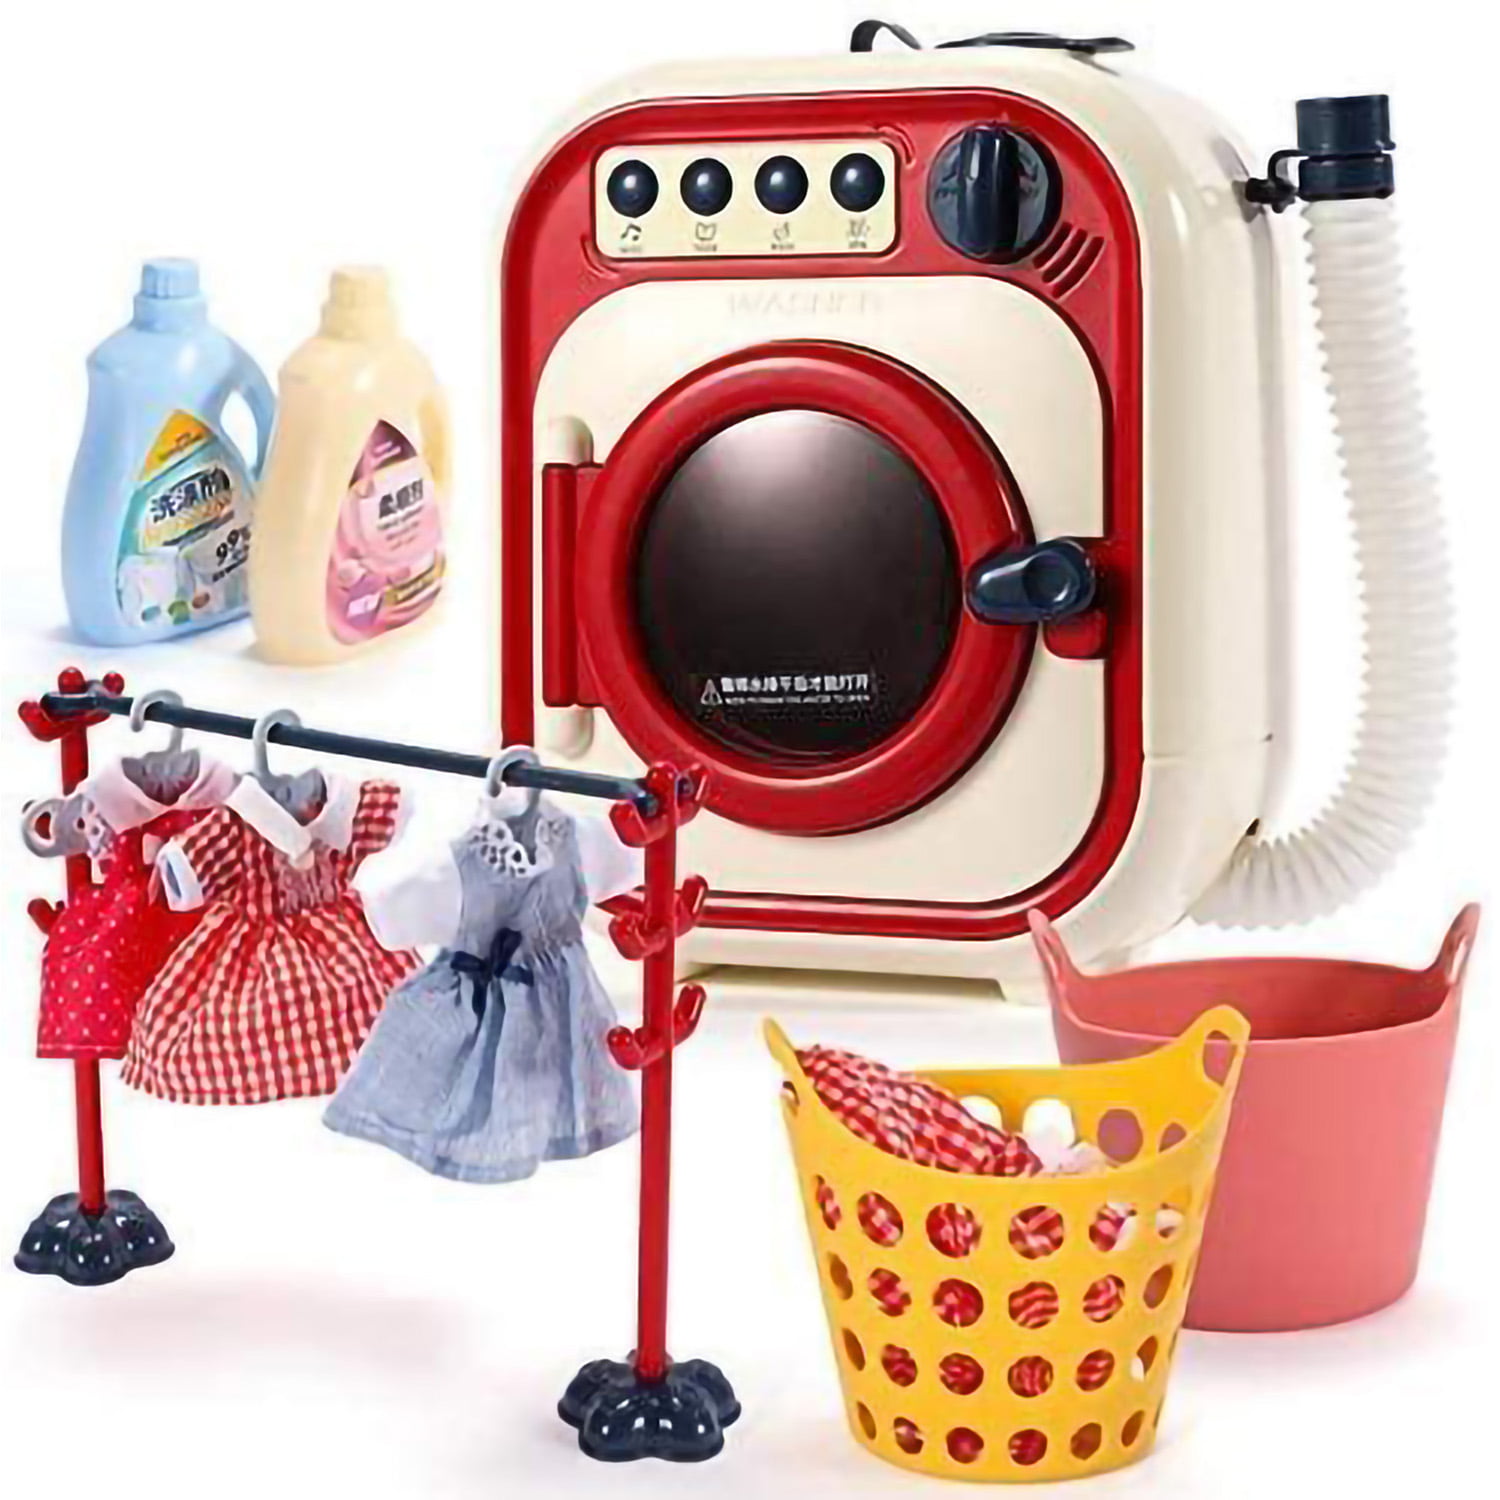 VOSAREA Electronic Toy Washer Washing Machine Toy Housekeeping Laundry Toy Pretend Role Play Appliance Toys for Kids Boys Girls 